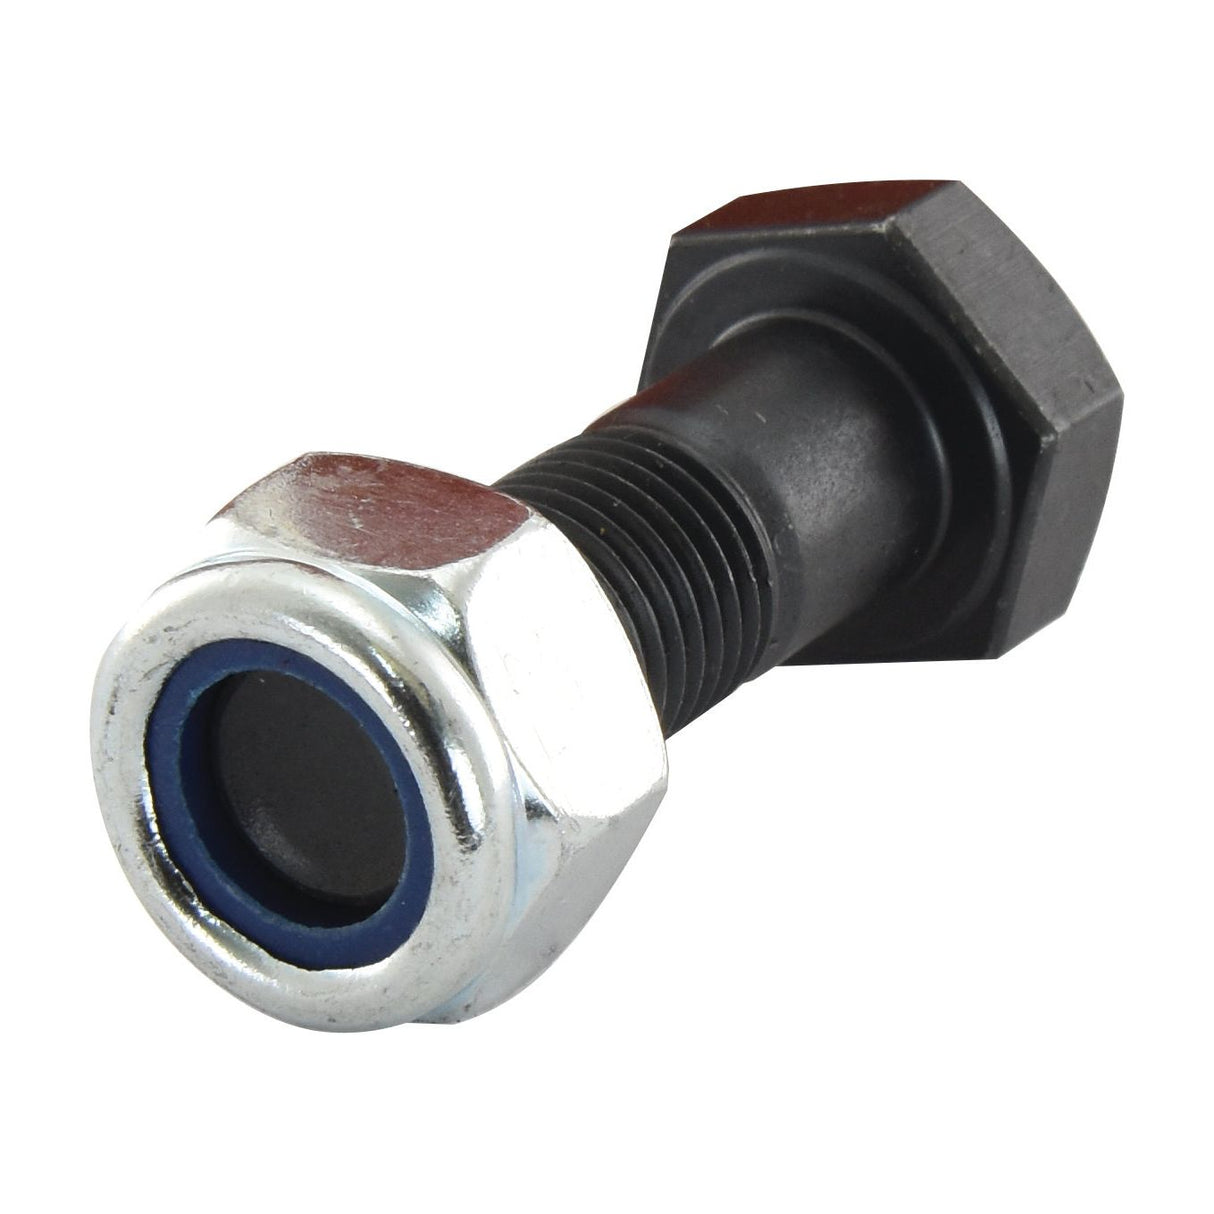 Hexagonal Head Bolt With Nut (TH) - M10 x 86mm, Tensile strength 10.9 ( Loose)
 - S.77576 - Farming Parts